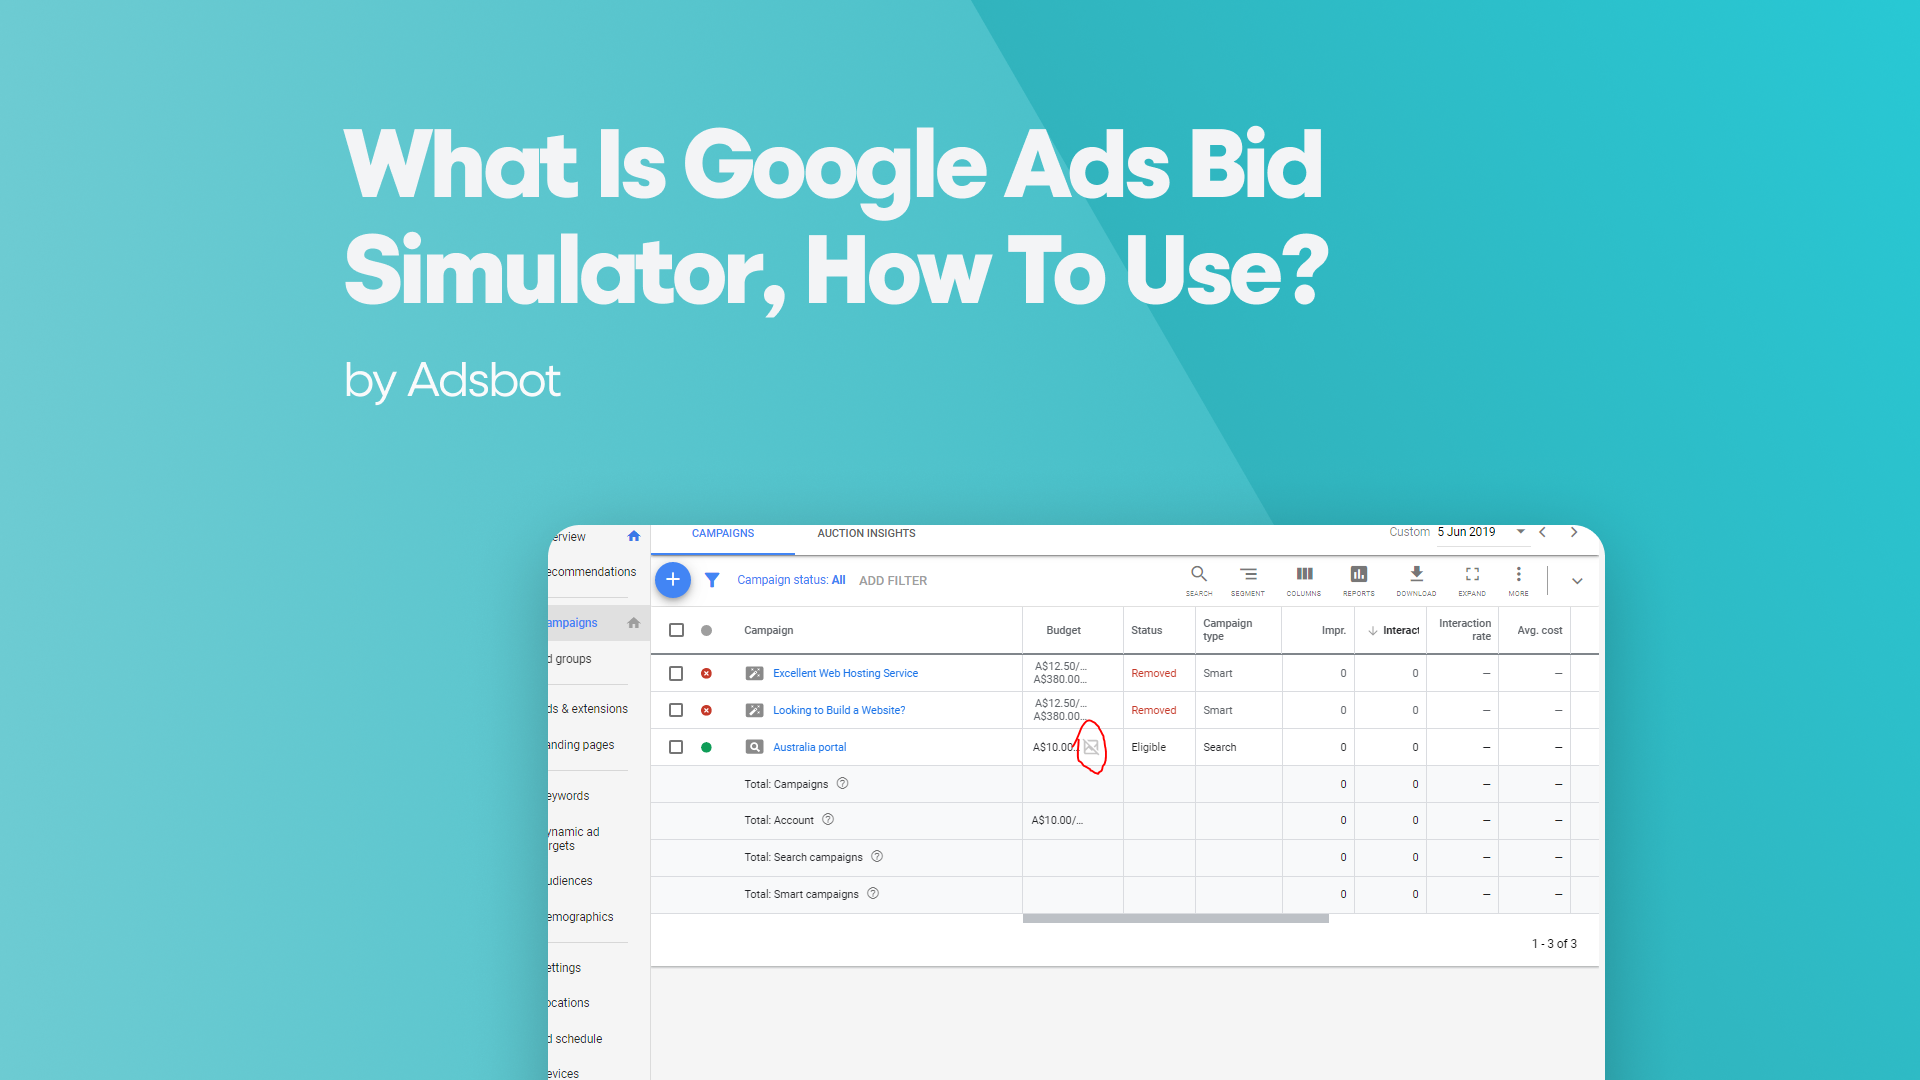 What is Google Ads Bid Simulator & How to Use It